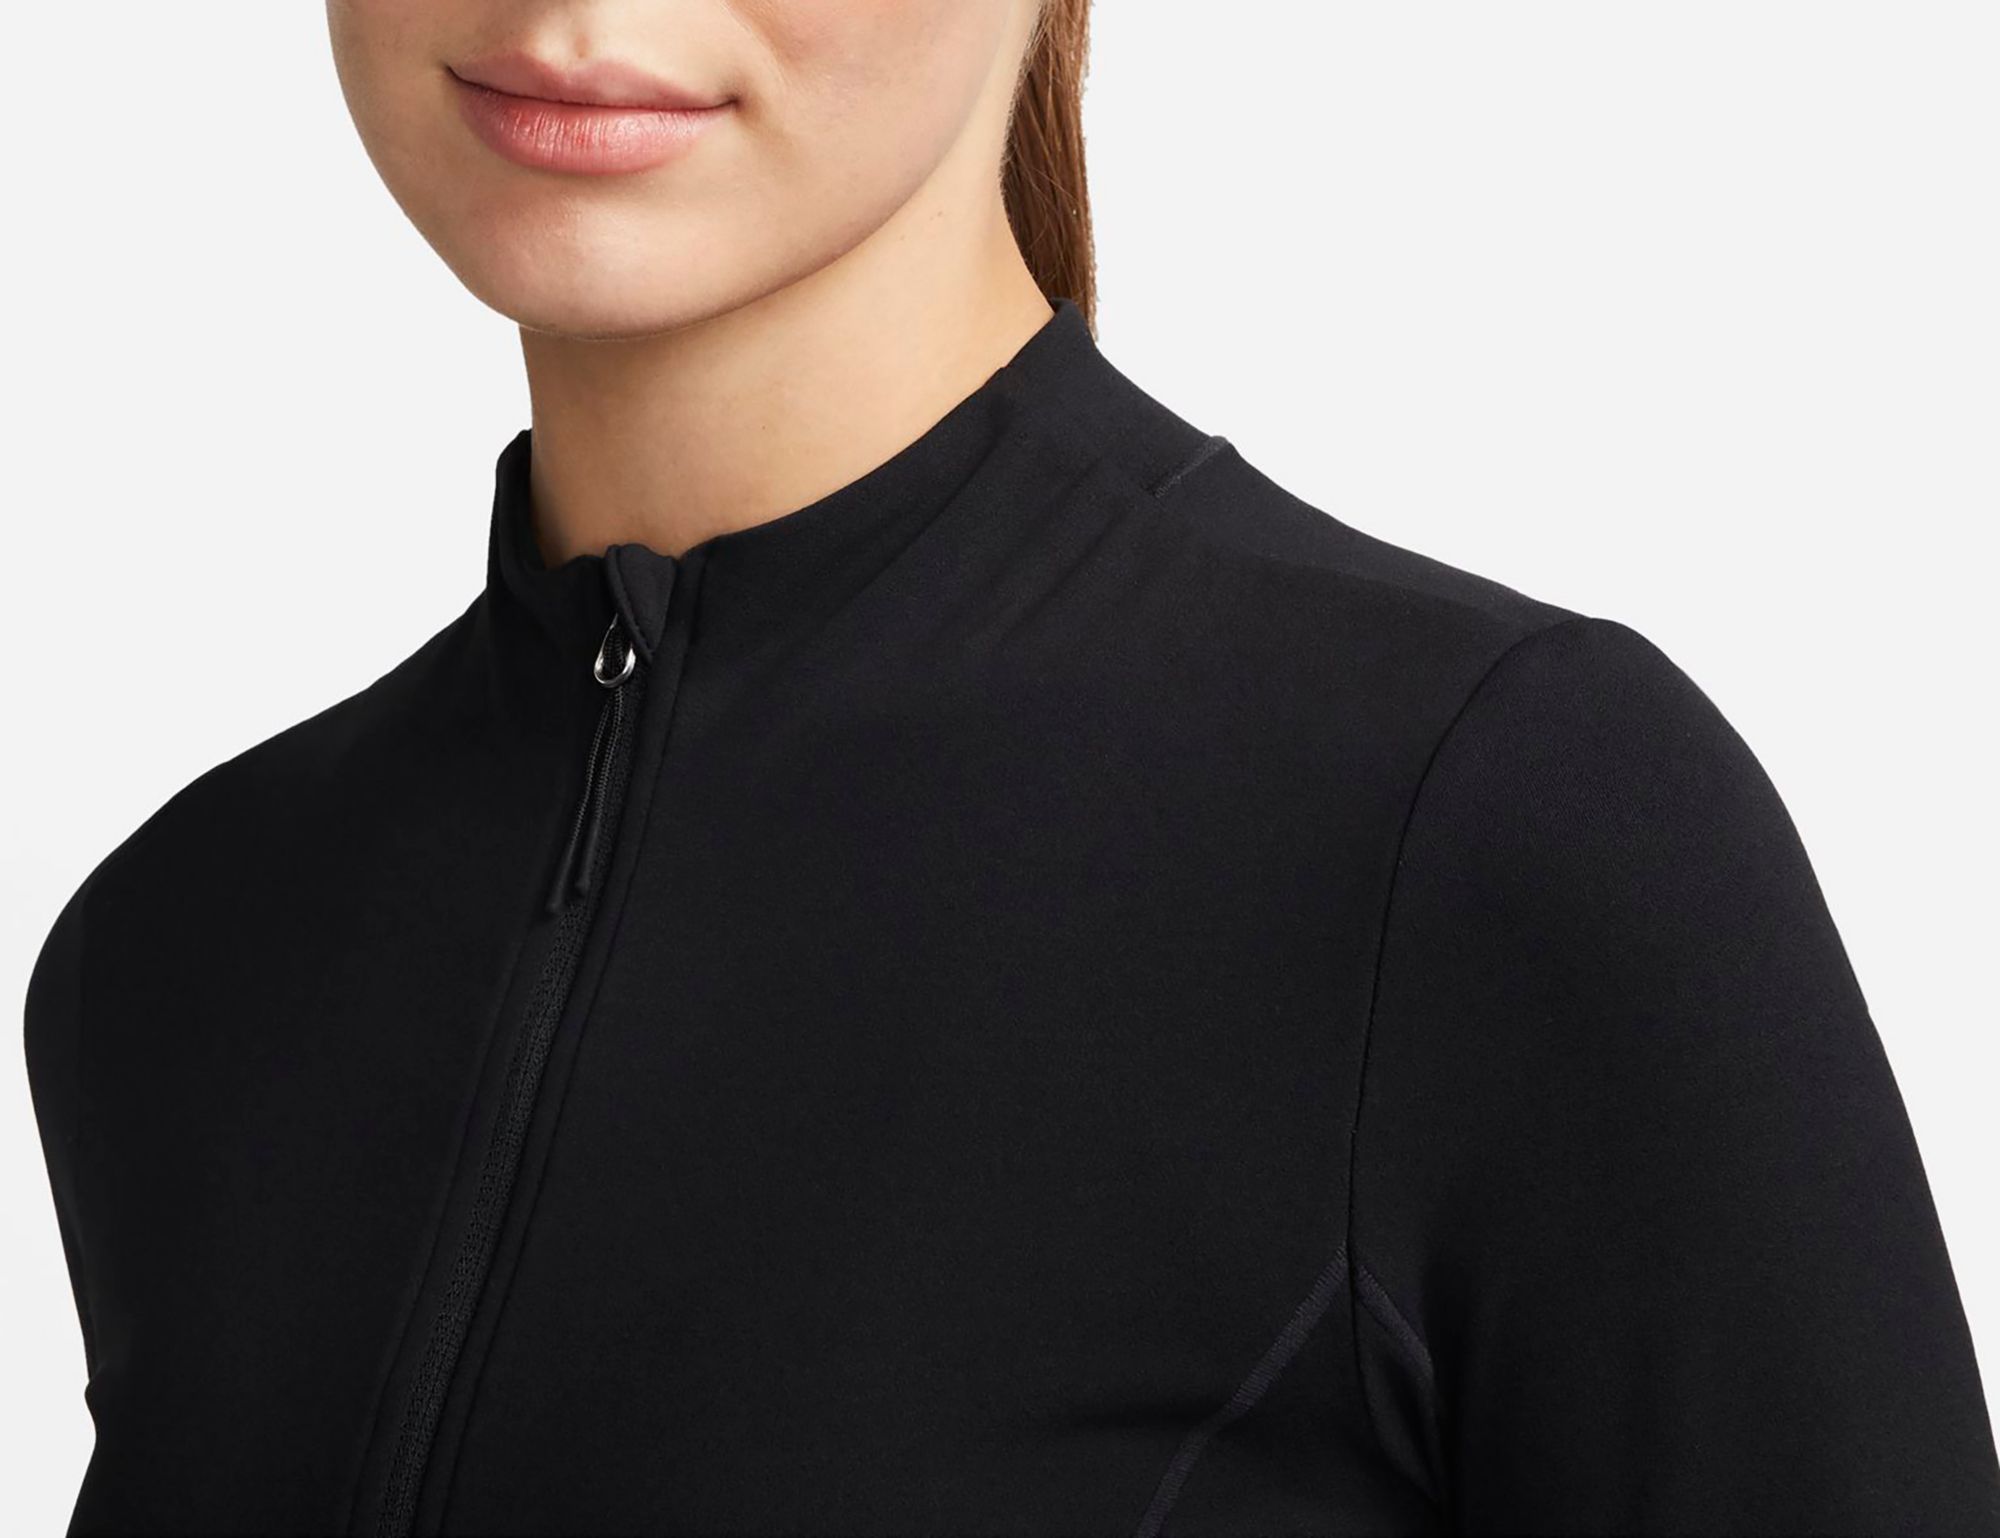 Nike Women's Yoga Dri-FIT Luxe Fitted Jacket